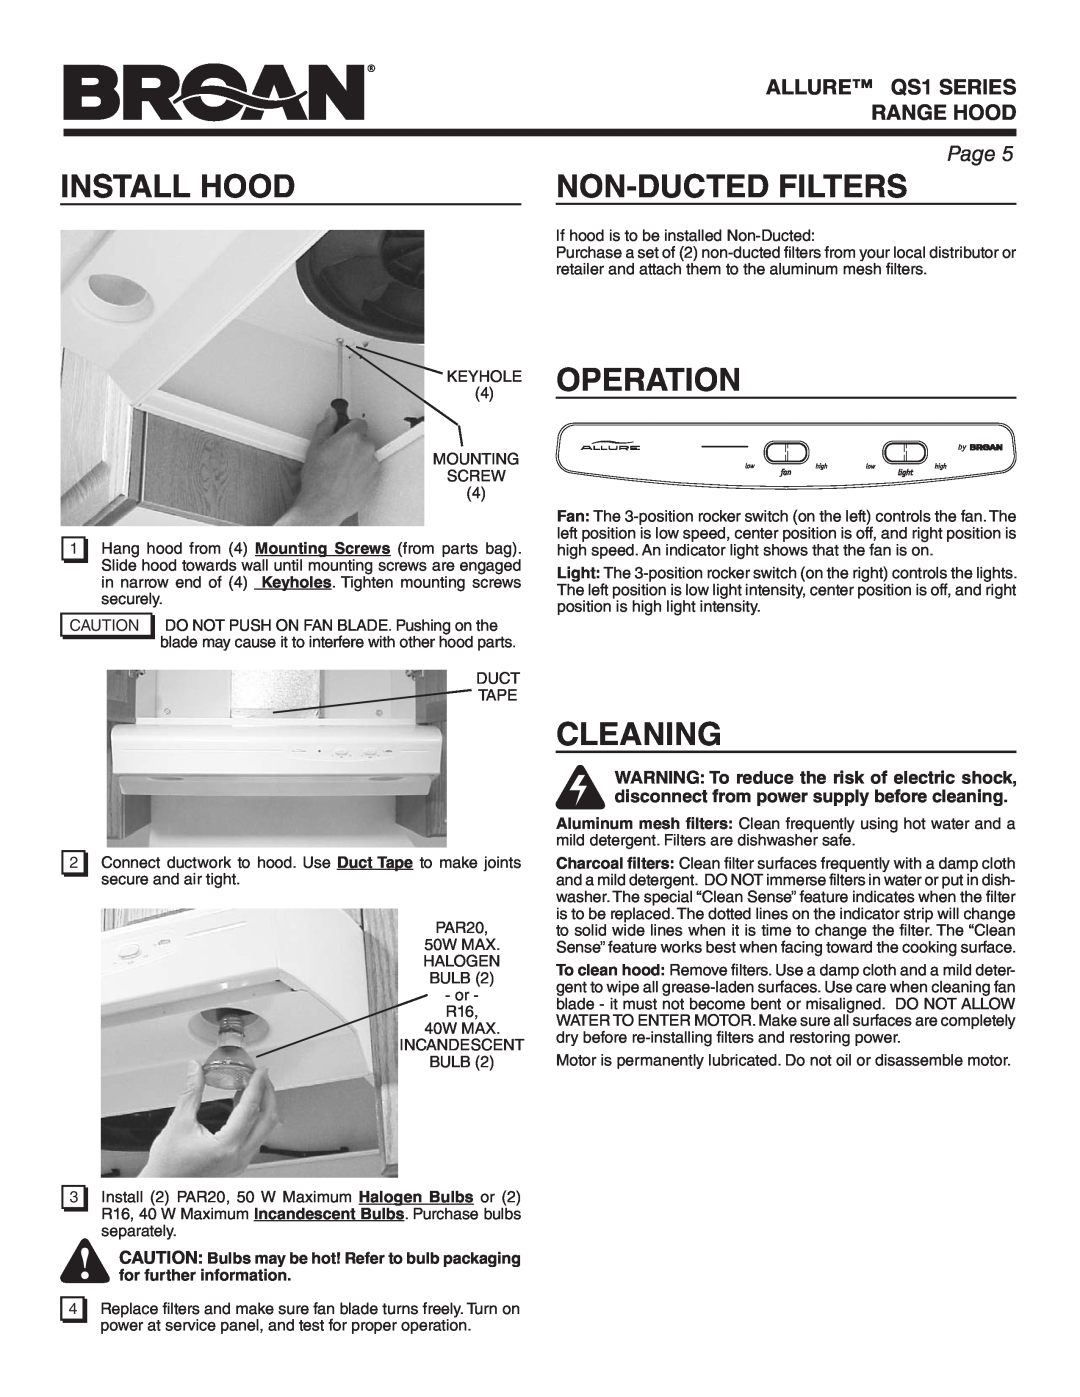 Broan QS136WW, QS130WW, QS136BL Install Hood, Non-Ducted Filters, Operation, Cleaning, ALLURE QS1 SERIES RANGE HOOD, Page 